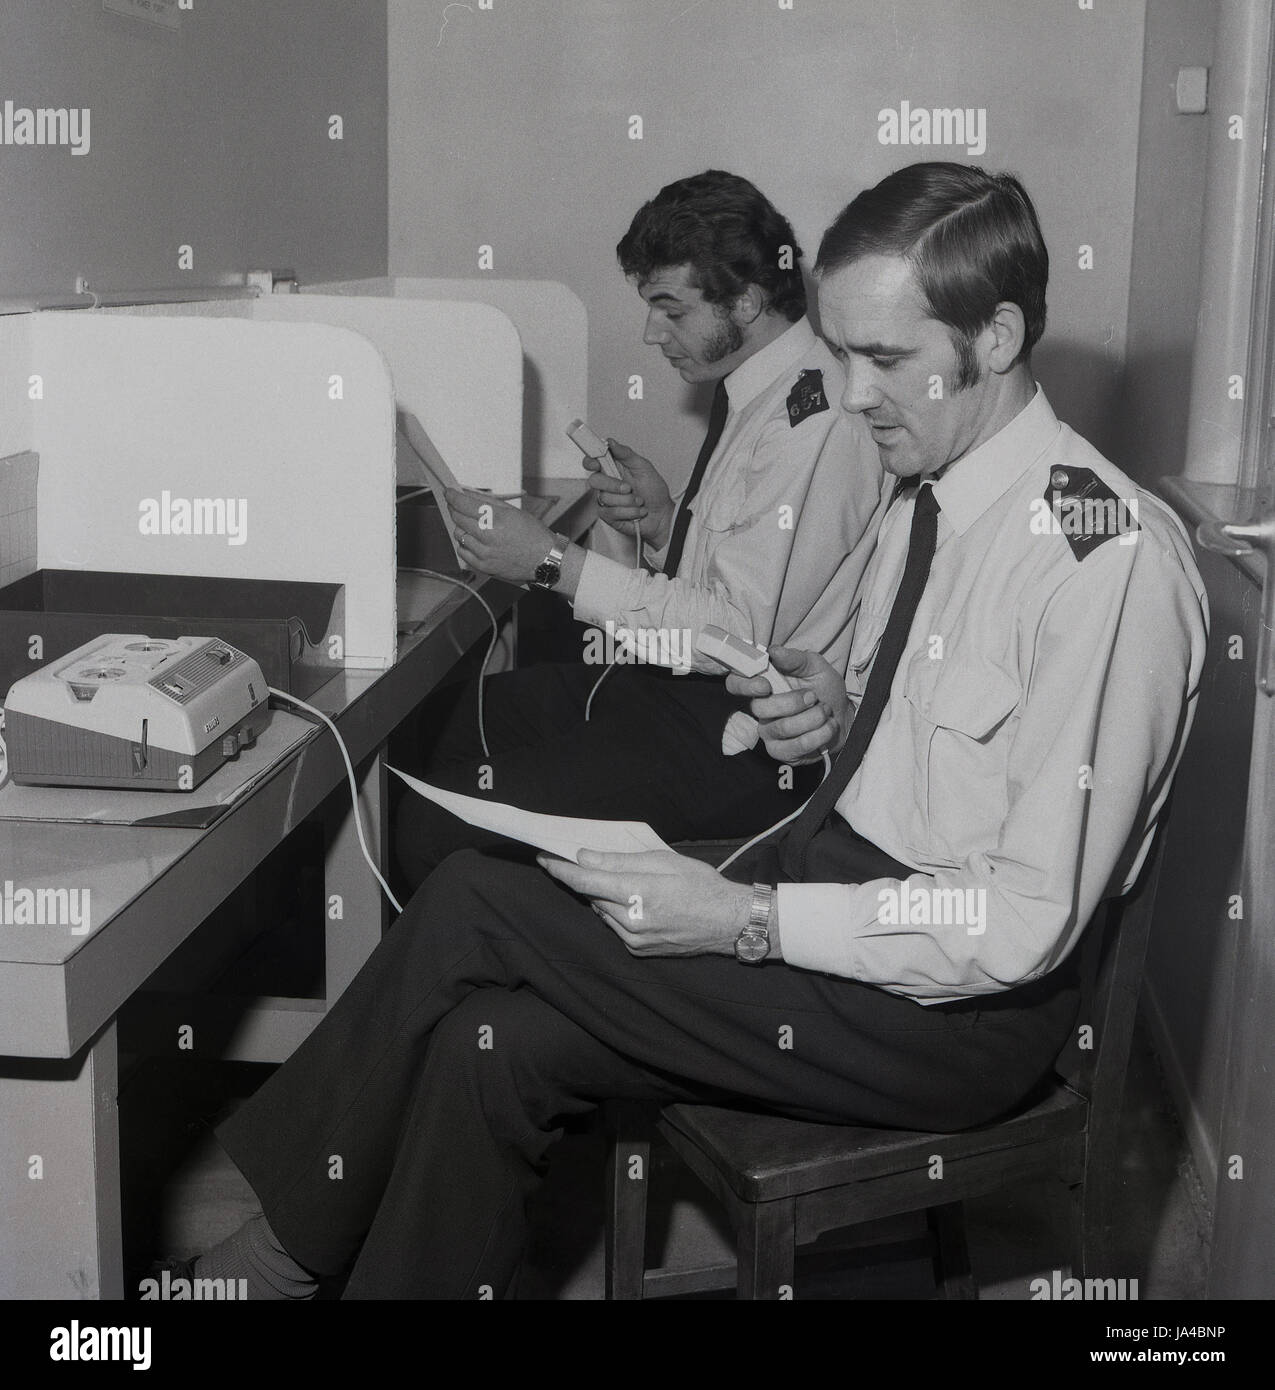 1970s, two uniformed Police officers sitting at booths using the new dictaphone or audio recording machines the Metropolitan Police service has introduced to to file statements or reports. Stock Photo